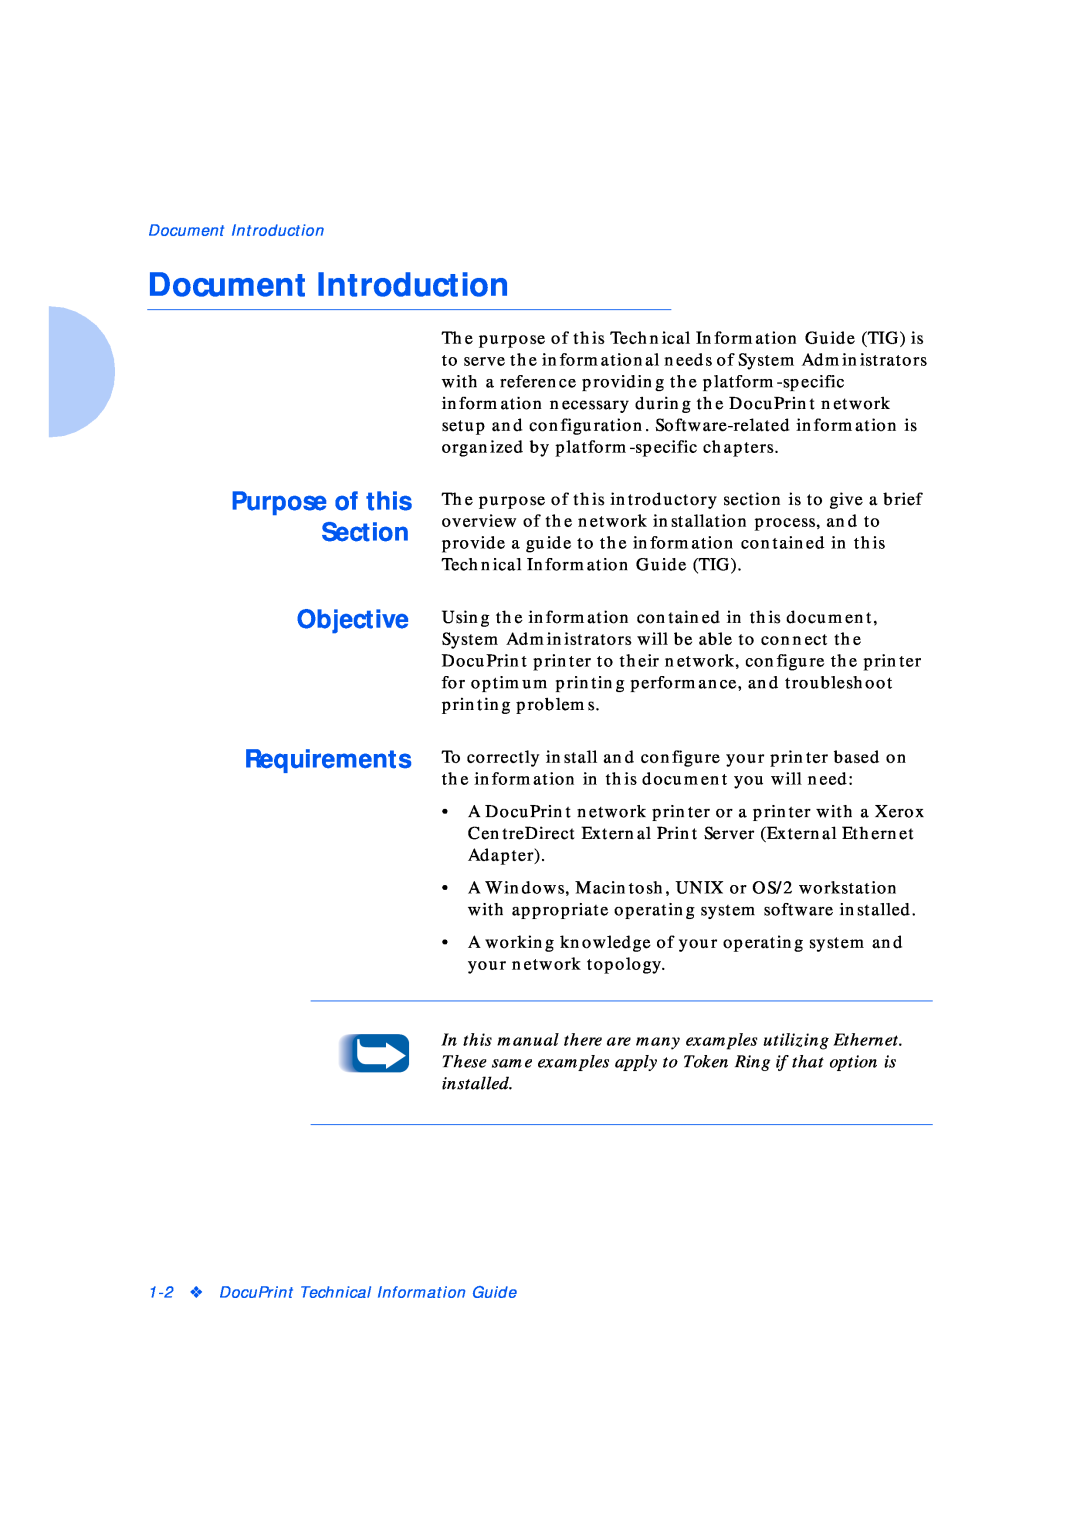 Xerox Network Laser Printers manual Document Introduction, Objective, Purpose of this Section 